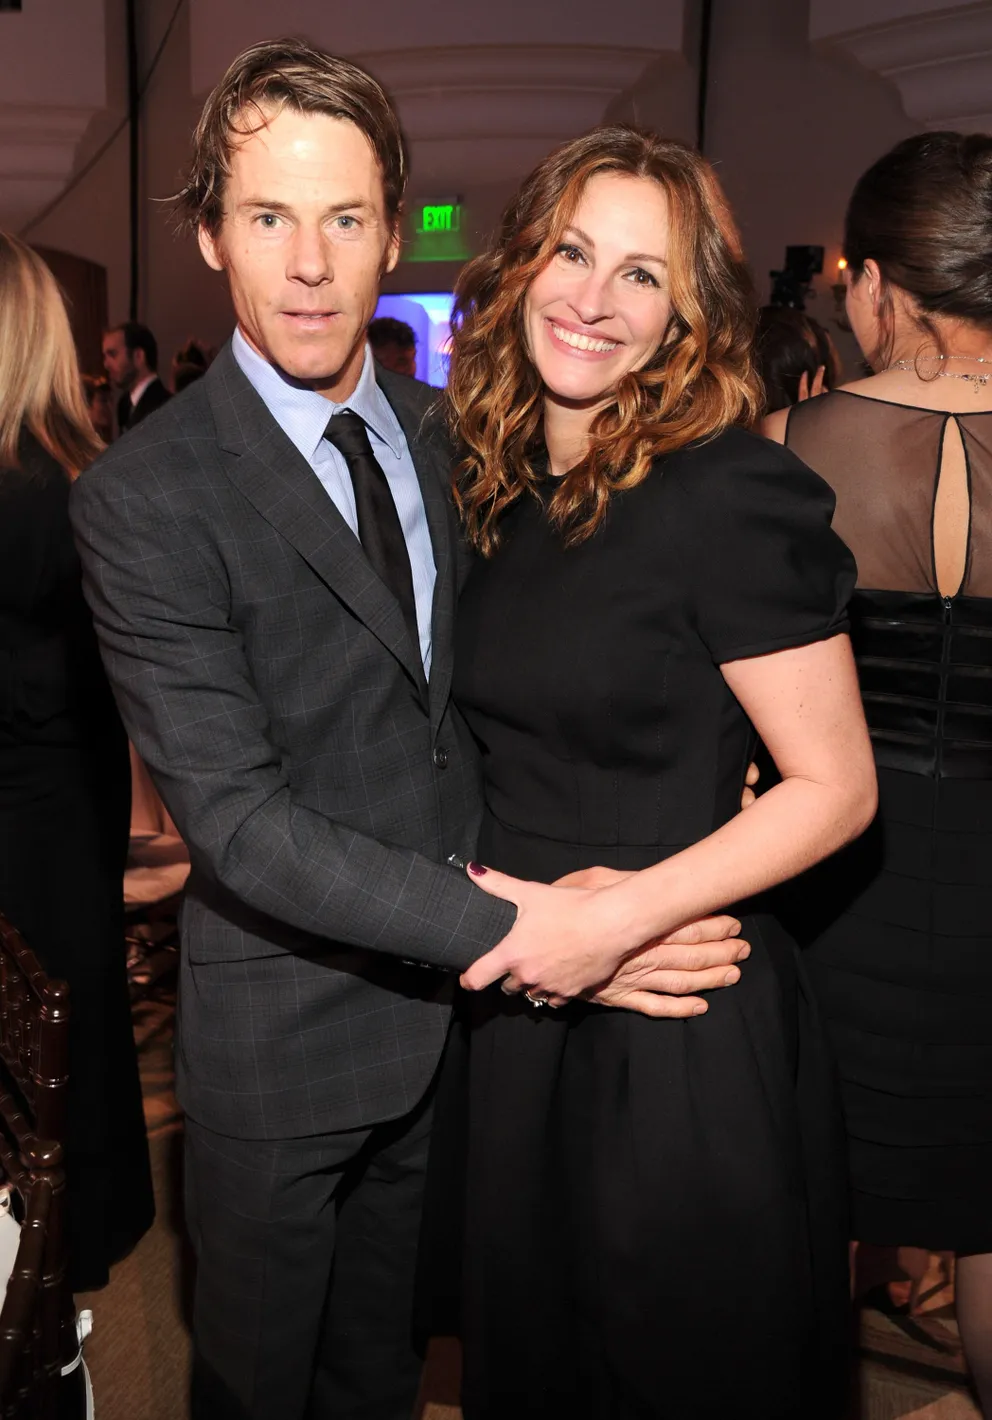 Danny Moder and Julia Roberts attend the 3rd annual Sean Penn & Friends HELP HAITI HOME Gala benefiting J/P HRO presented by Giorgio Armani at Montage Beverly Hills on January 11, 2014, in Beverly Hills, California. | Source: Getty Images.